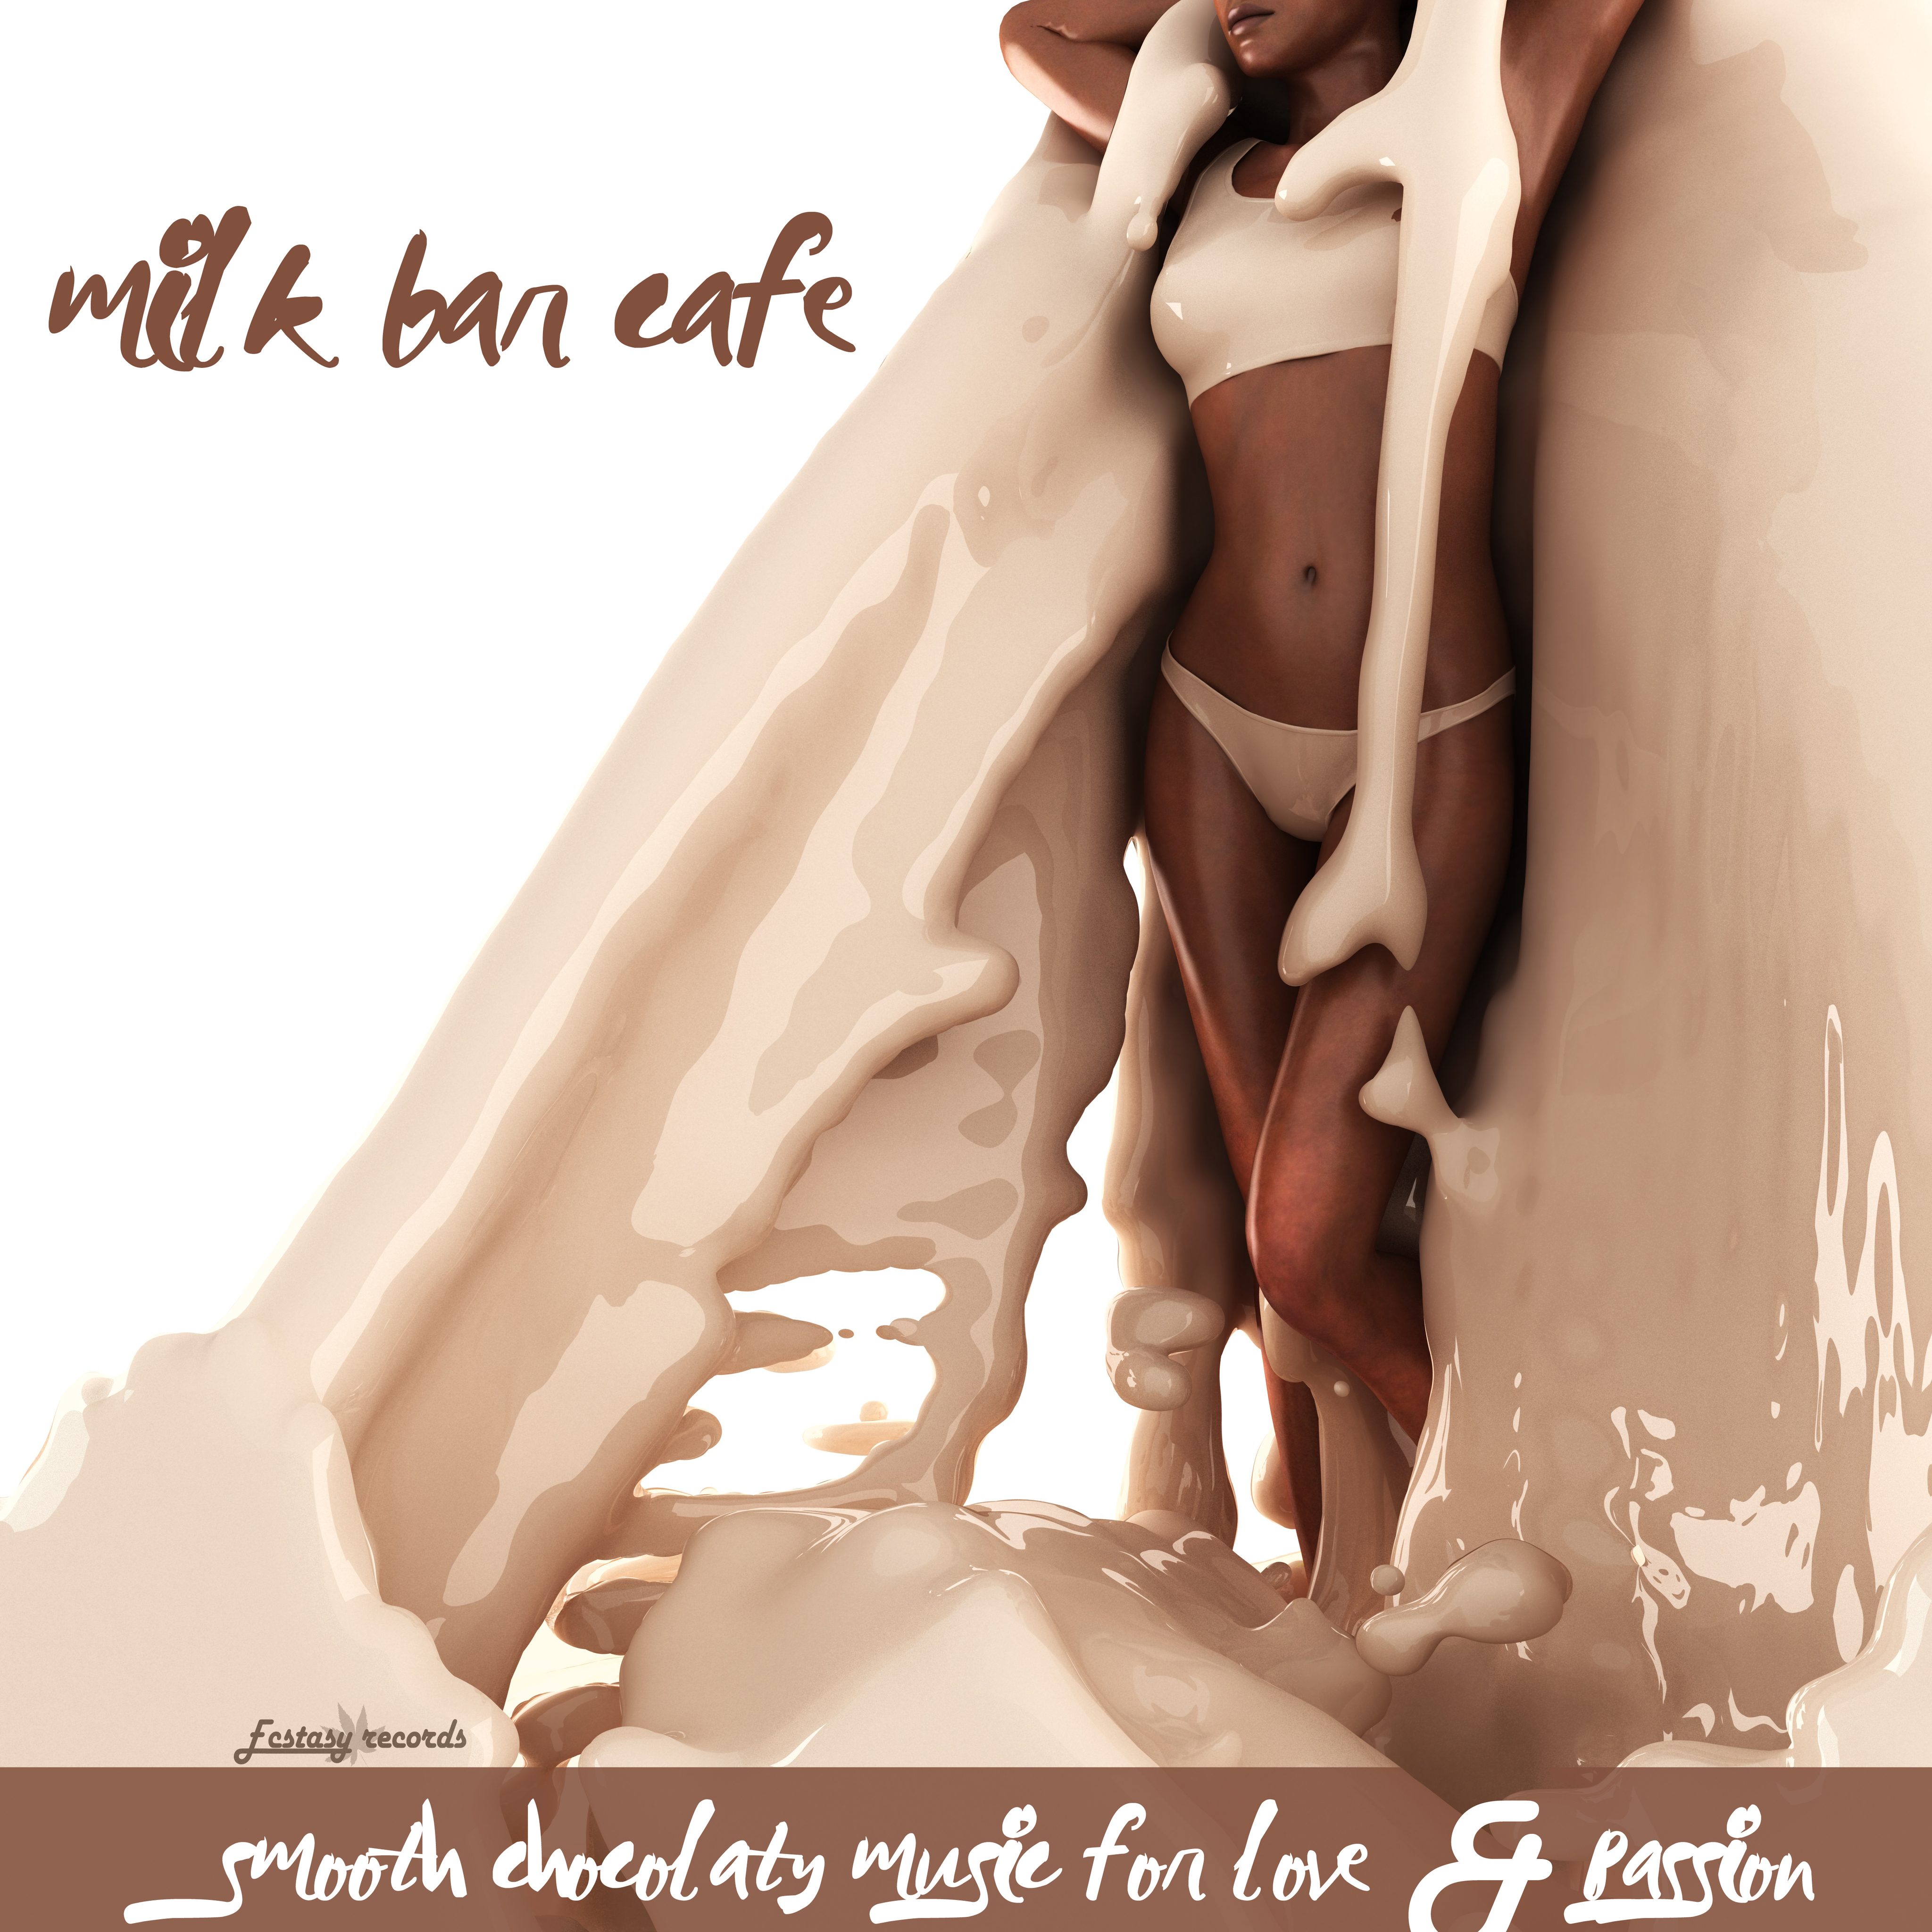 Milk Bar Cafe (Smooth Chocolaty Music for Love & Passion)